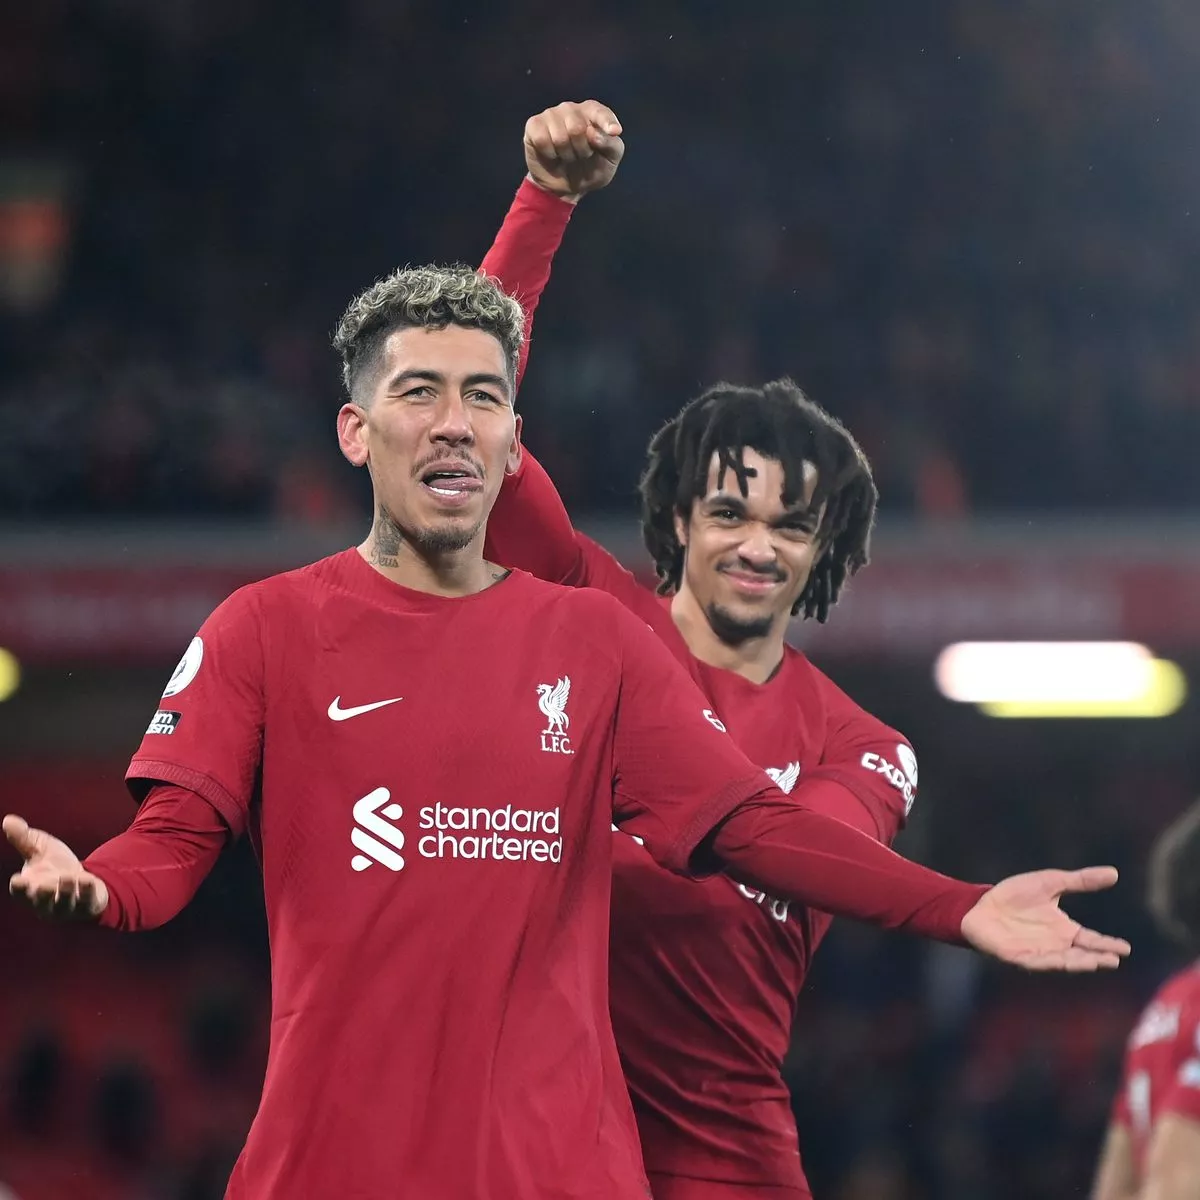 Liverpool legend names the one player whose departure would be a 'bigger blow' than Salah - Reactions from fans, pundits, and experts